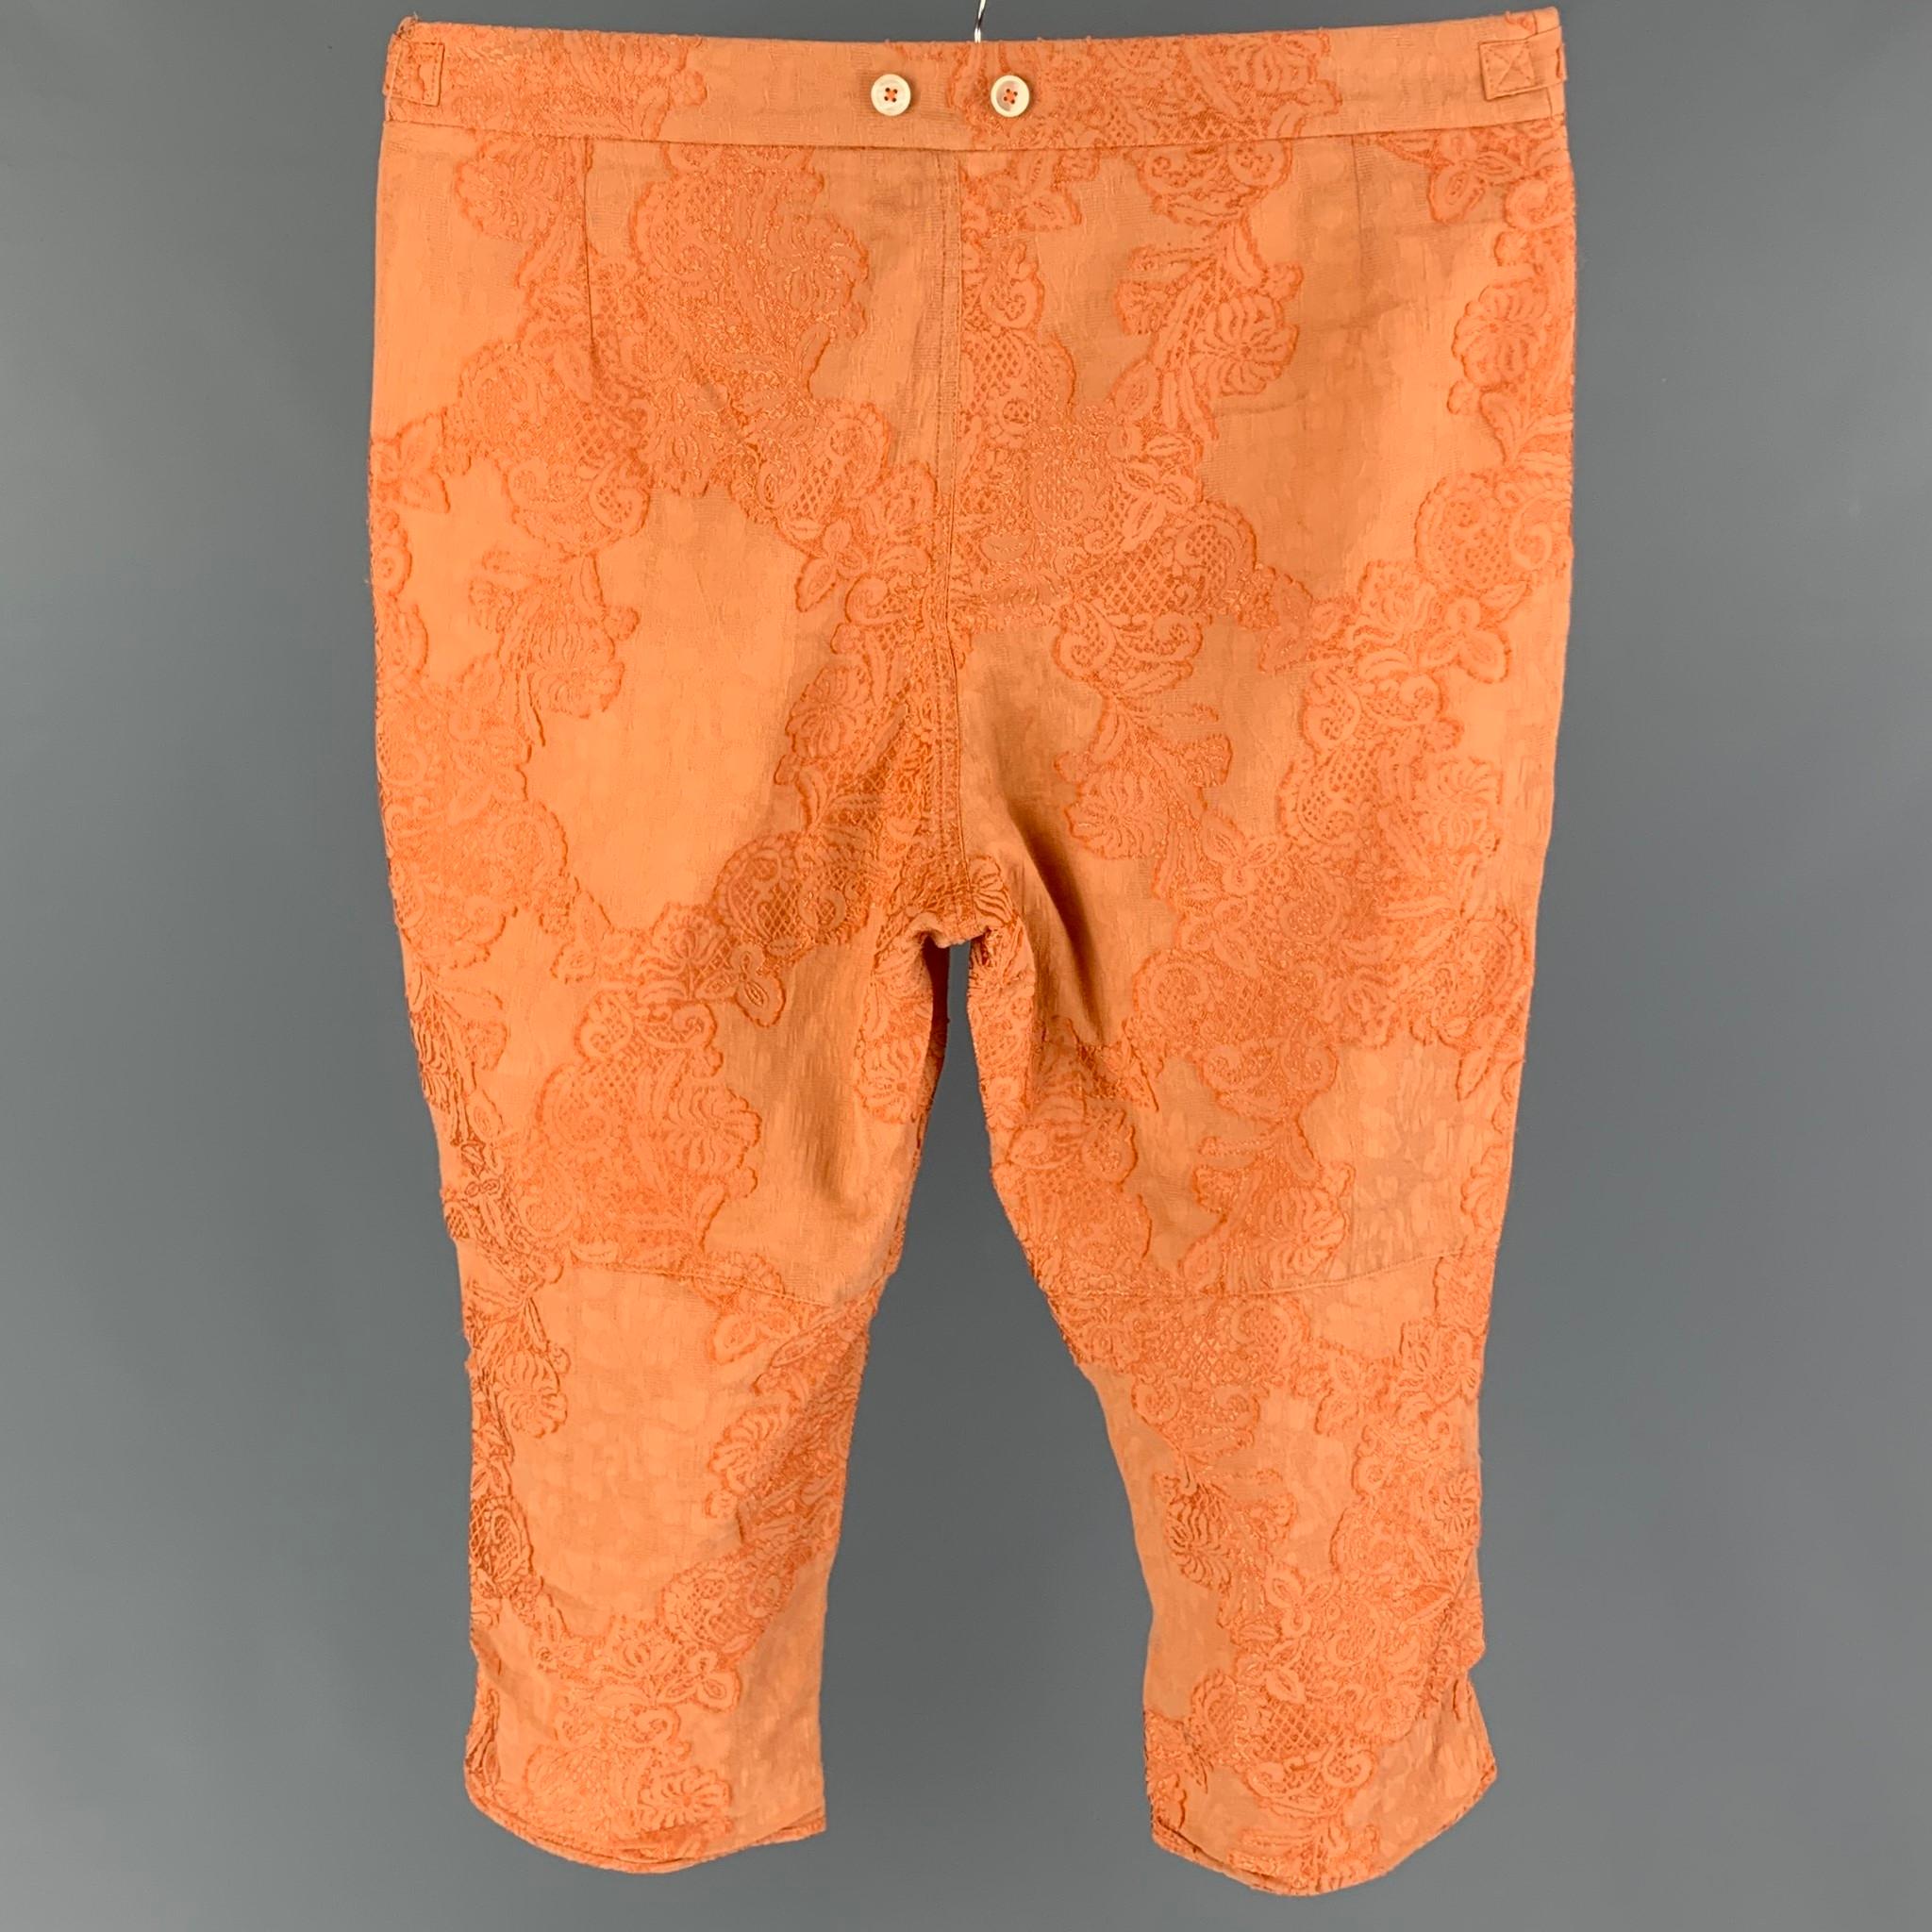 ANN DEMEULEMEESTER casual pants comes in a orange cotton featuring embroidered design throughout, cropped leg, side tabs, and a button fly closure. 

Good Pre-Owned Condition. Moderate discoloration at inner rise. As-Is.
Marked: